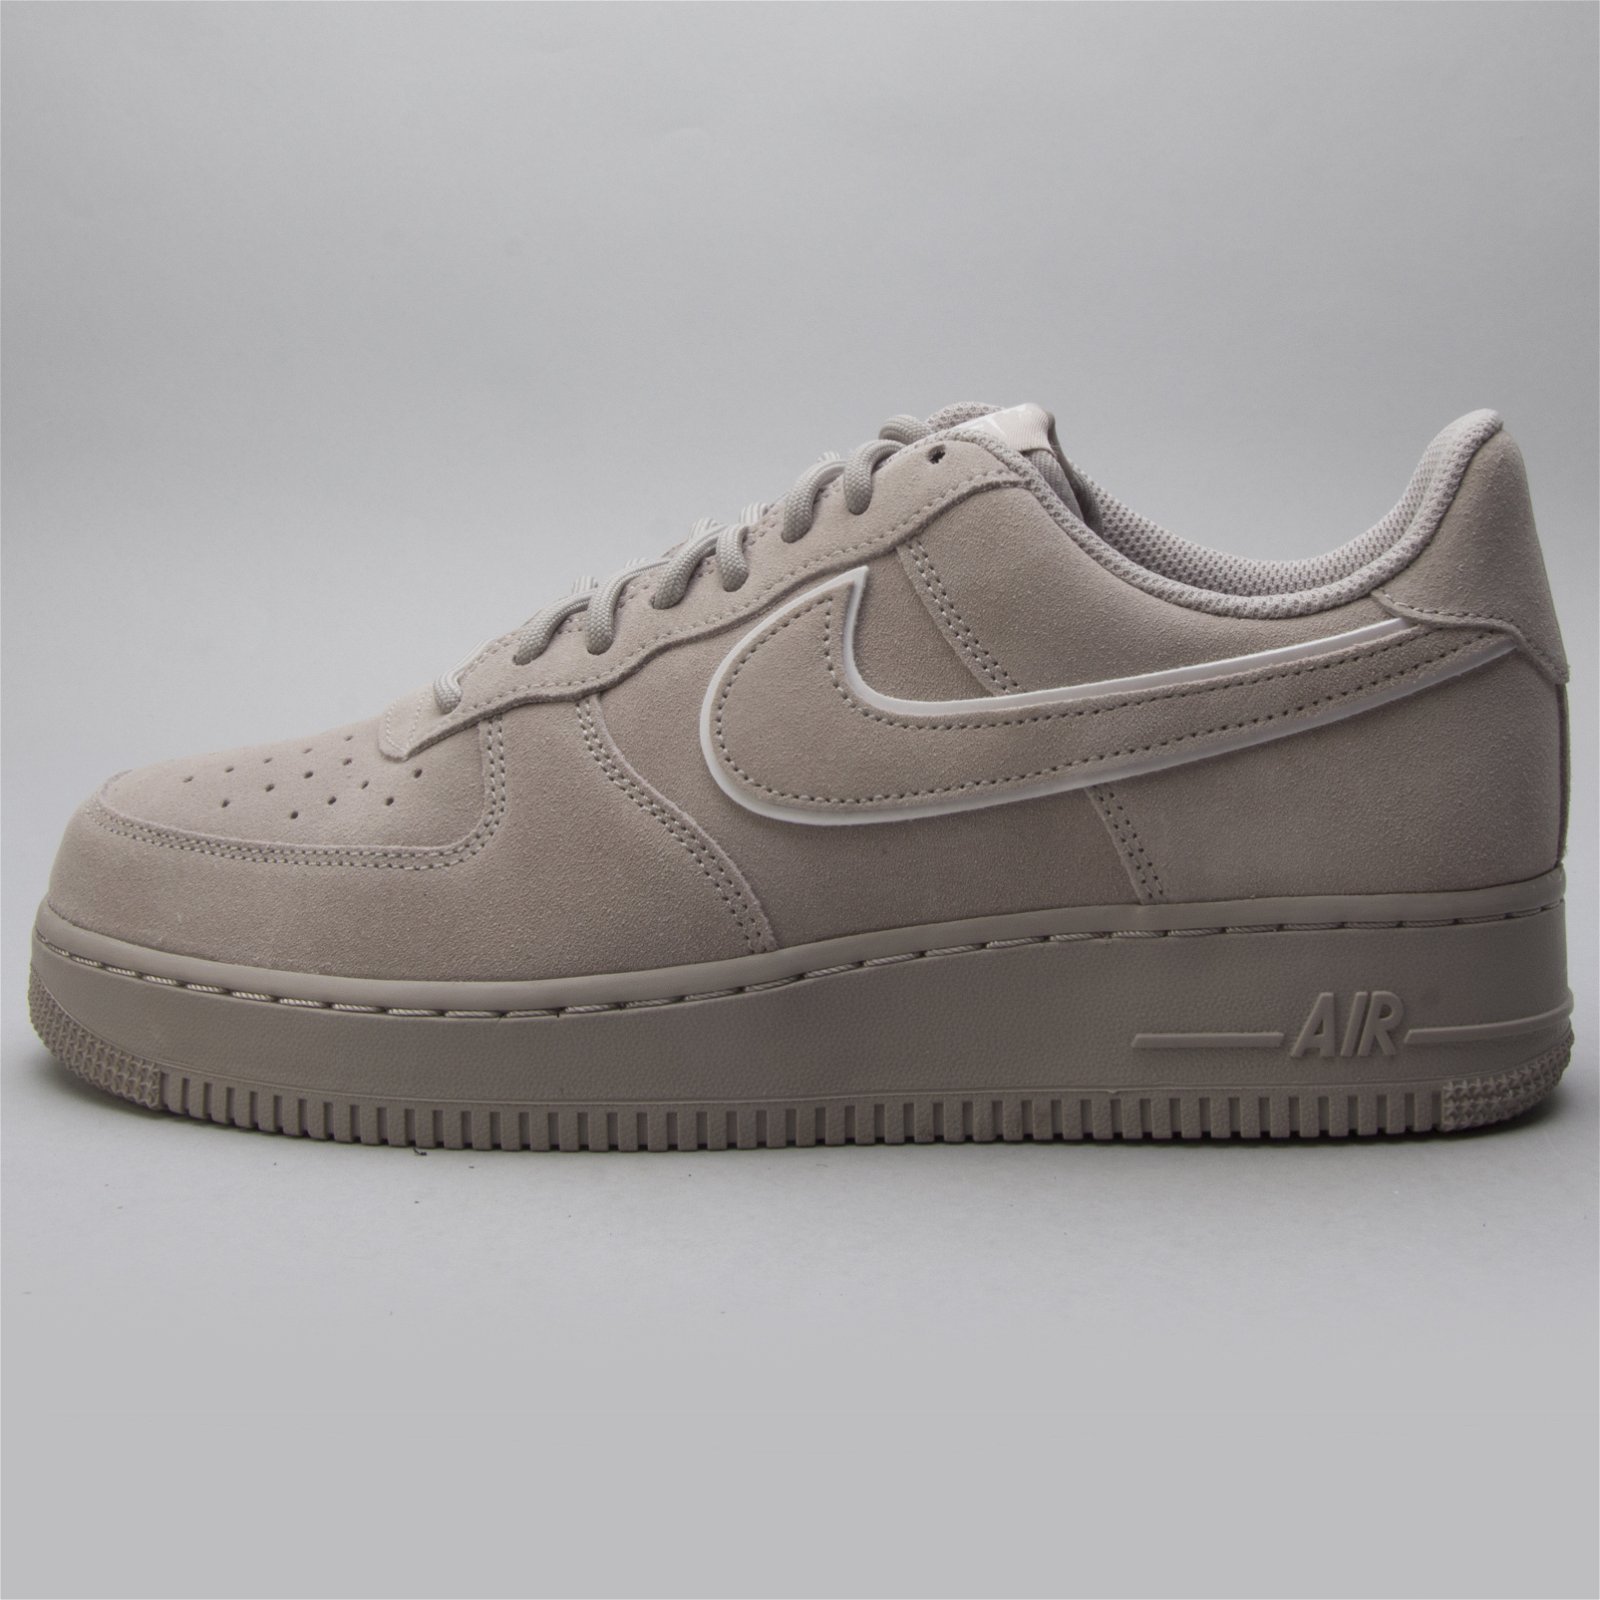 Nike Air Force 1 Low '07 LV8 ''Suede Pack'' AA1117-201 |